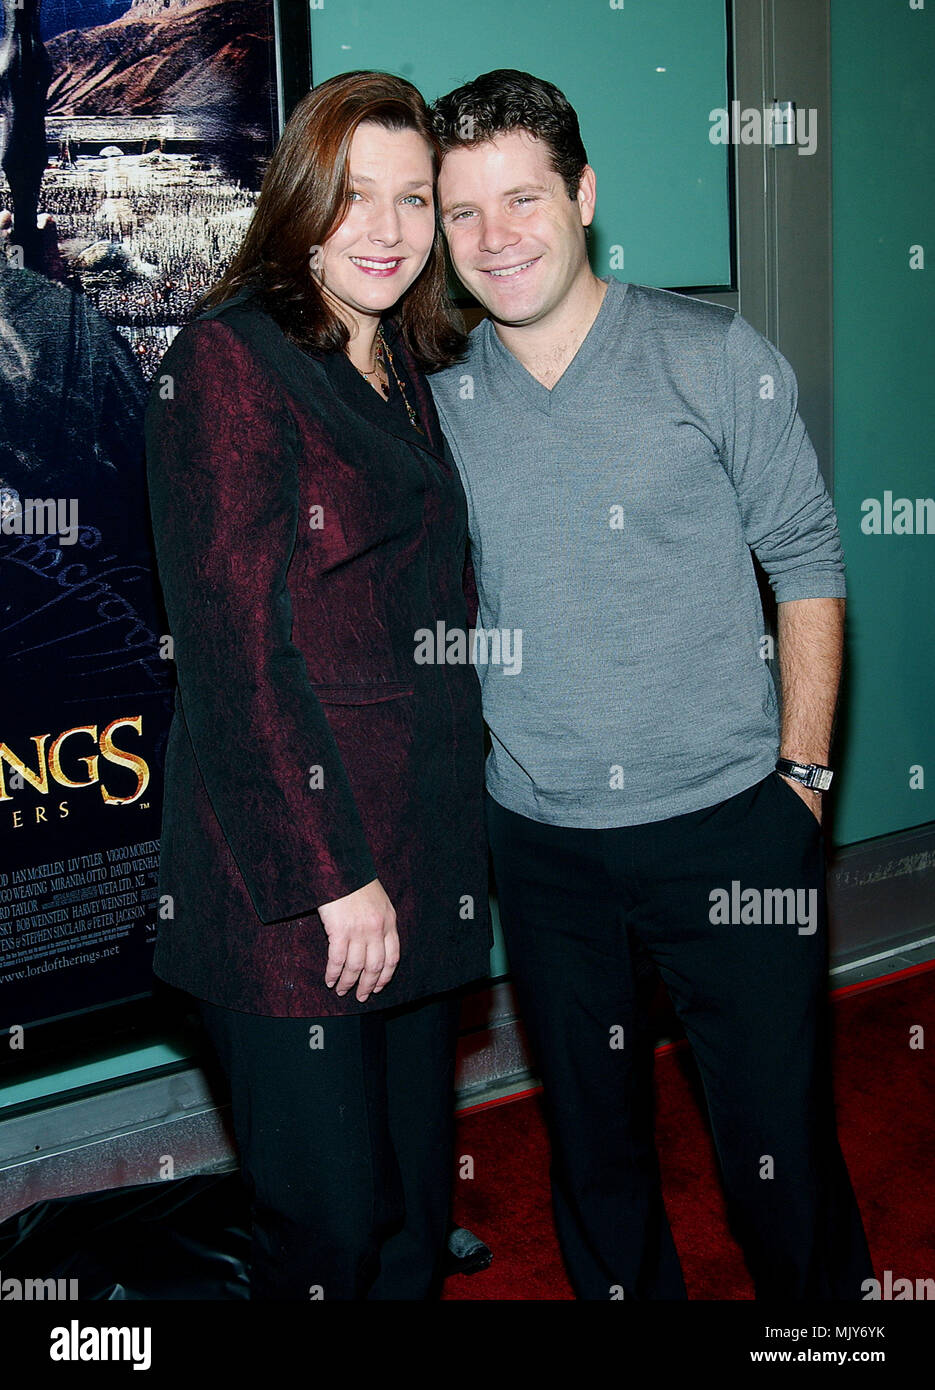 Sean Astin and wife Christine arriving at the premiere of 'The Lord Of The Rings: The Two Towers' at the Cineramadome Theatre in Los Angeles. December 15, 2002.           -            AstinSean Christine02A.jpg           -              AstinSean Christine02A.jpgAstinSean Christine02A  Event in Hollywood Life - California,  Red Carpet Event, Vertical, USA, Film Industry, Celebrities,  Photography, Bestof, Arts Culture and Entertainment, Topix Celebrities fashion /  from the Red Carpet-, Vertical, Best of, Hollywood Life, Event in Hollywood Life - California,  Red Carpet , USA, Film Industry, Ce Stock Photo